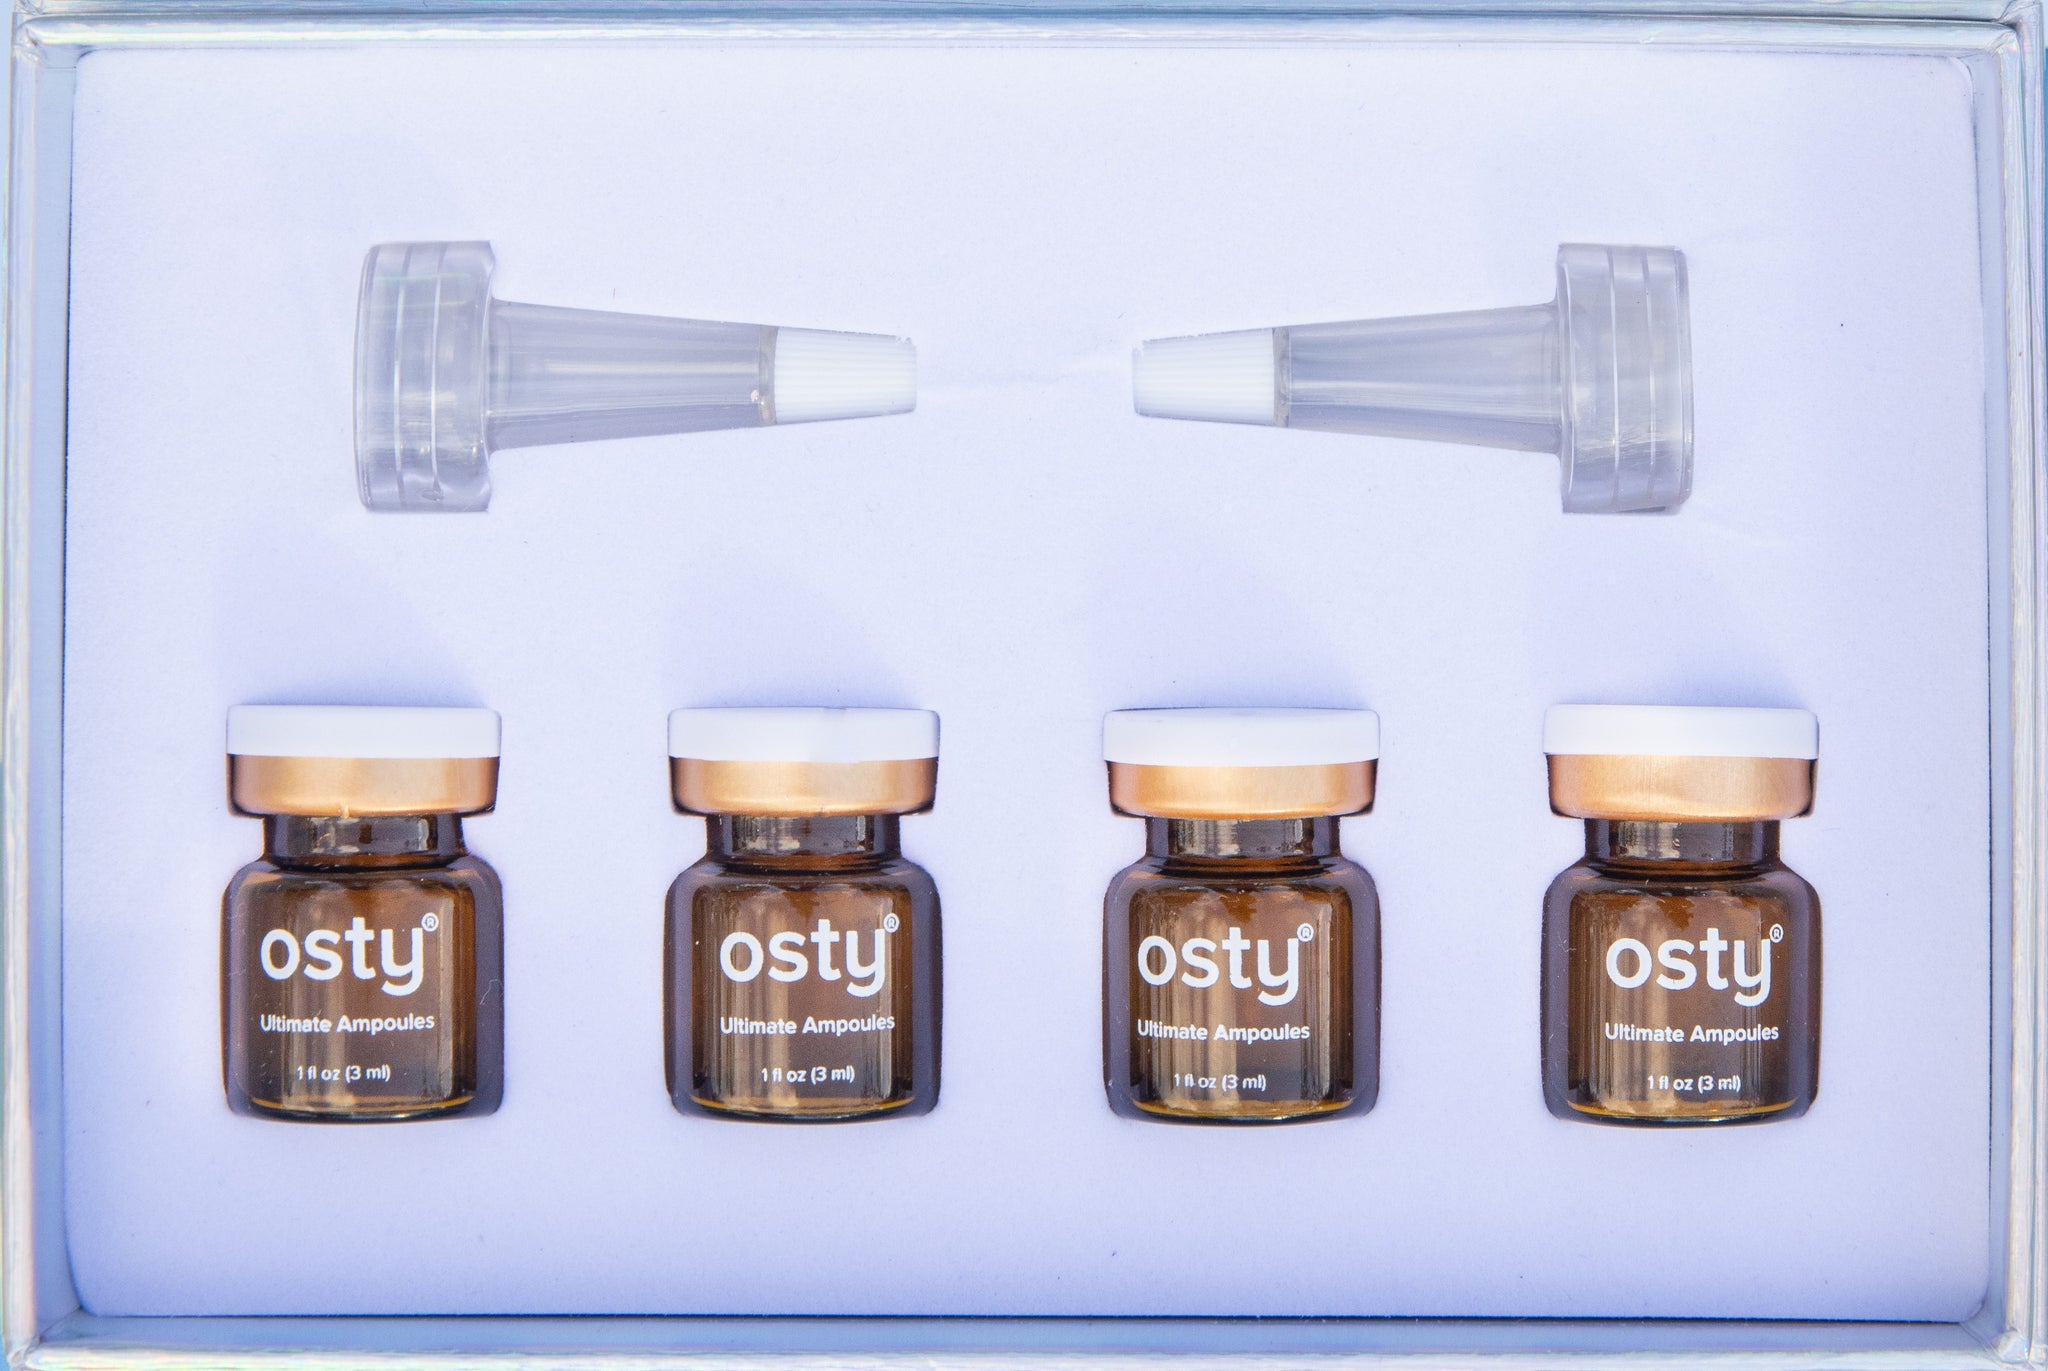 Ultimate Ampoules